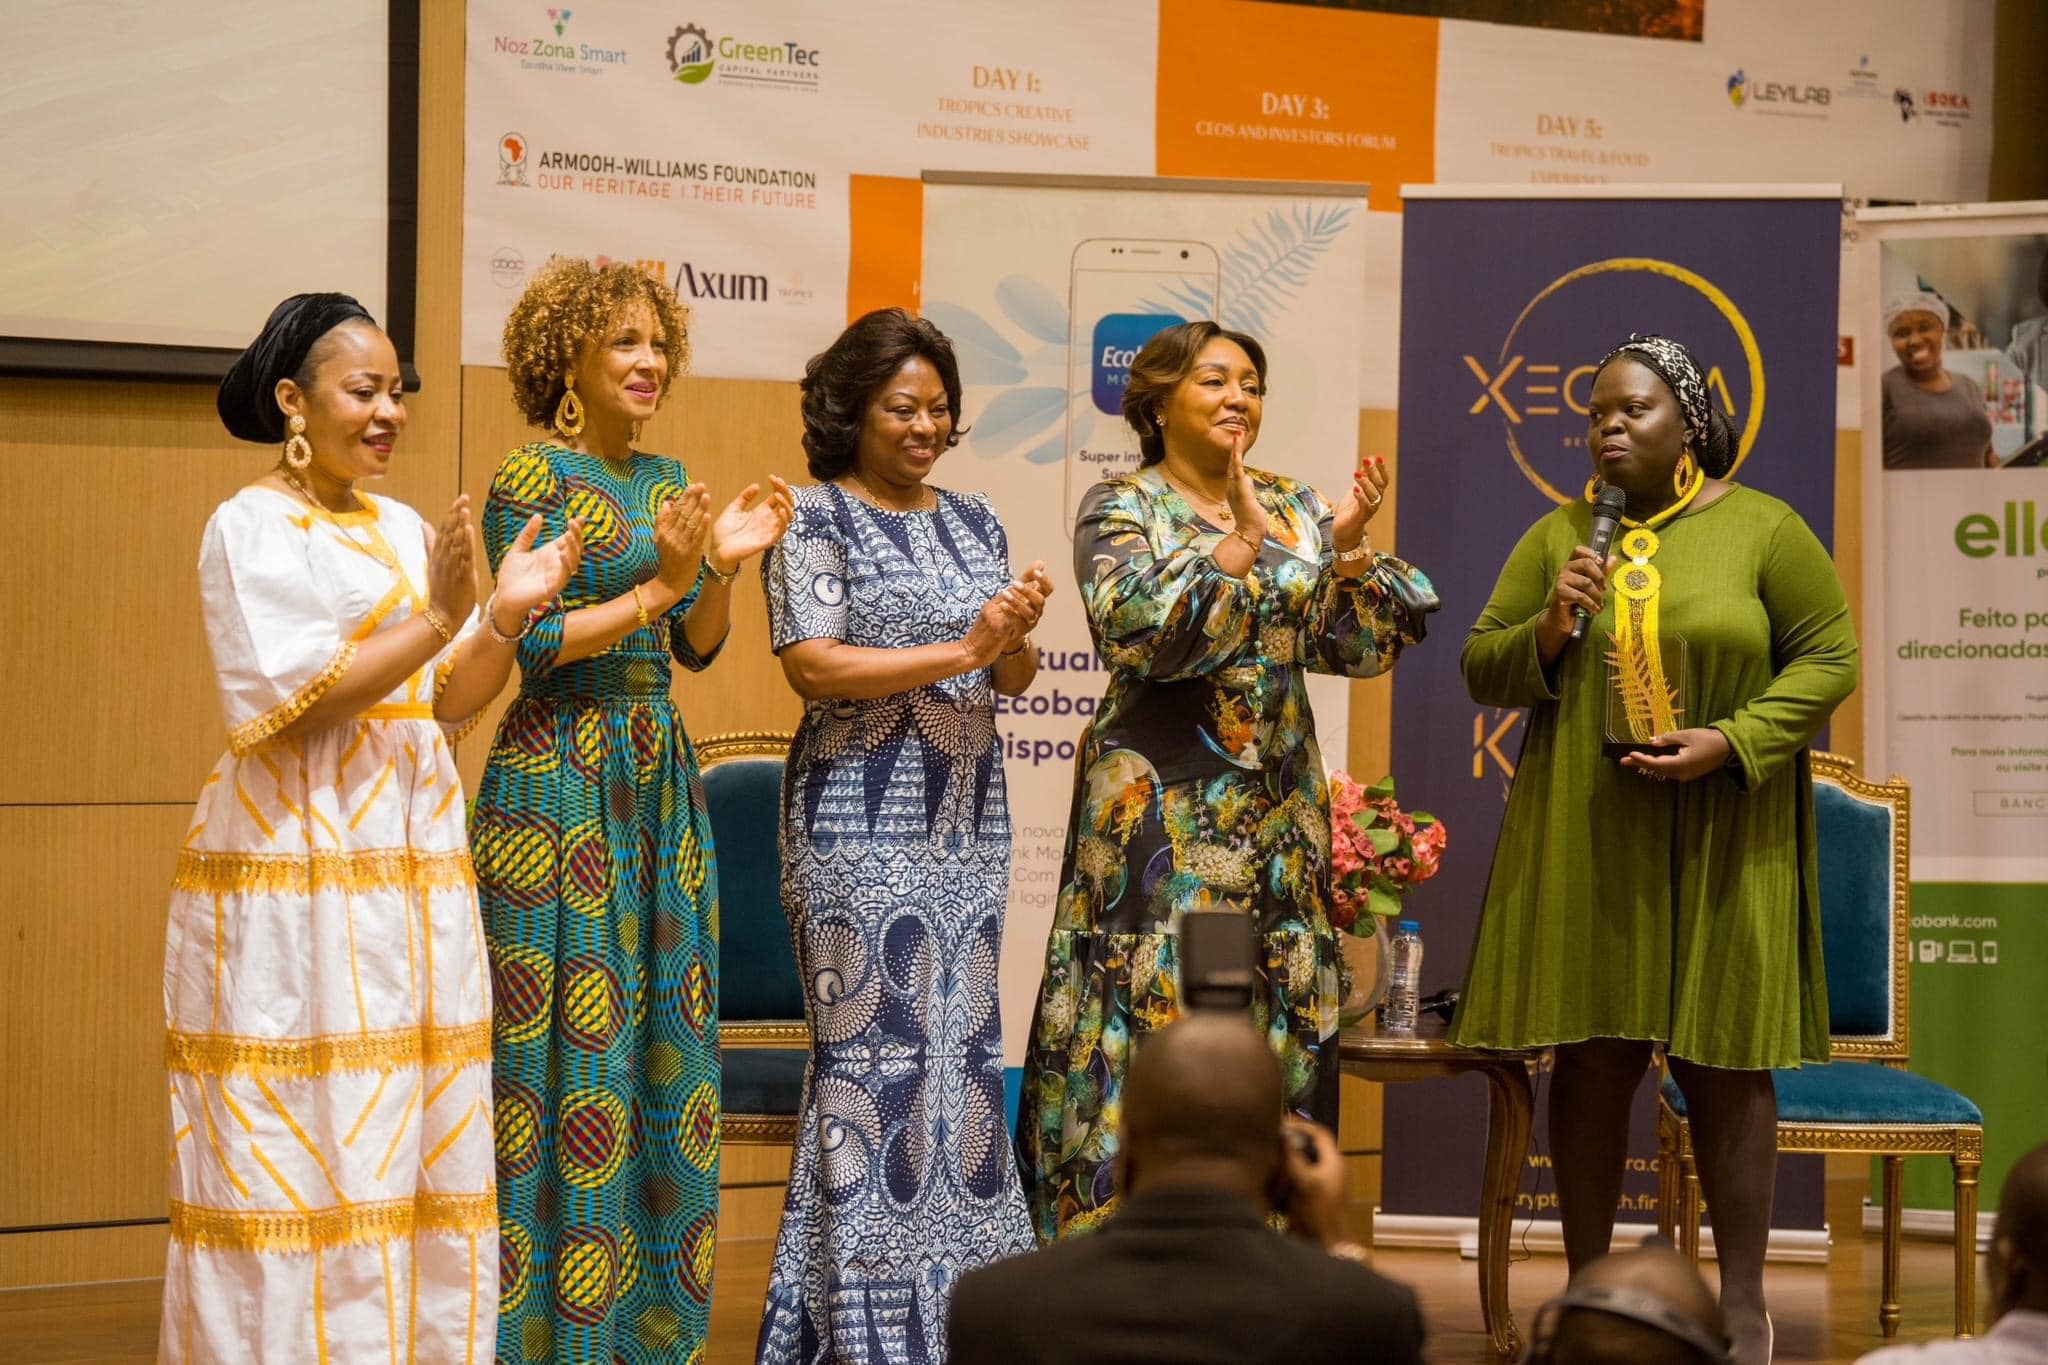 Panel discussion on women's participation during the Tropics Business Summit in Praia. (Photo by Kidjo Photography)